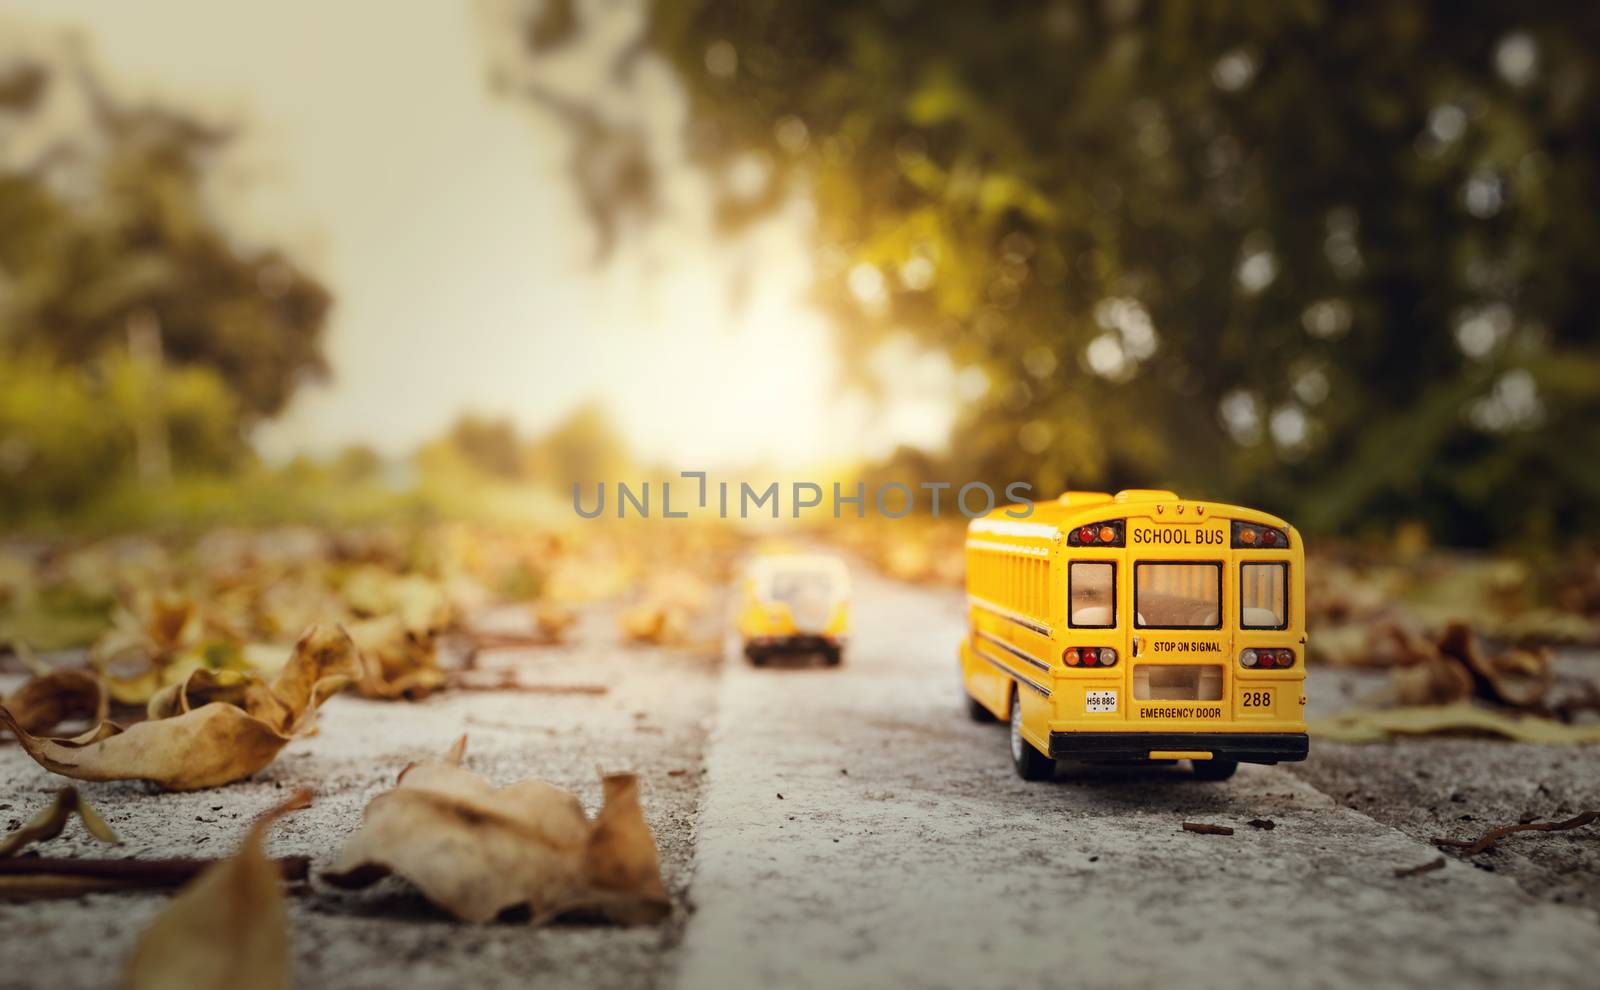 Yellow school bus toy model on country road.